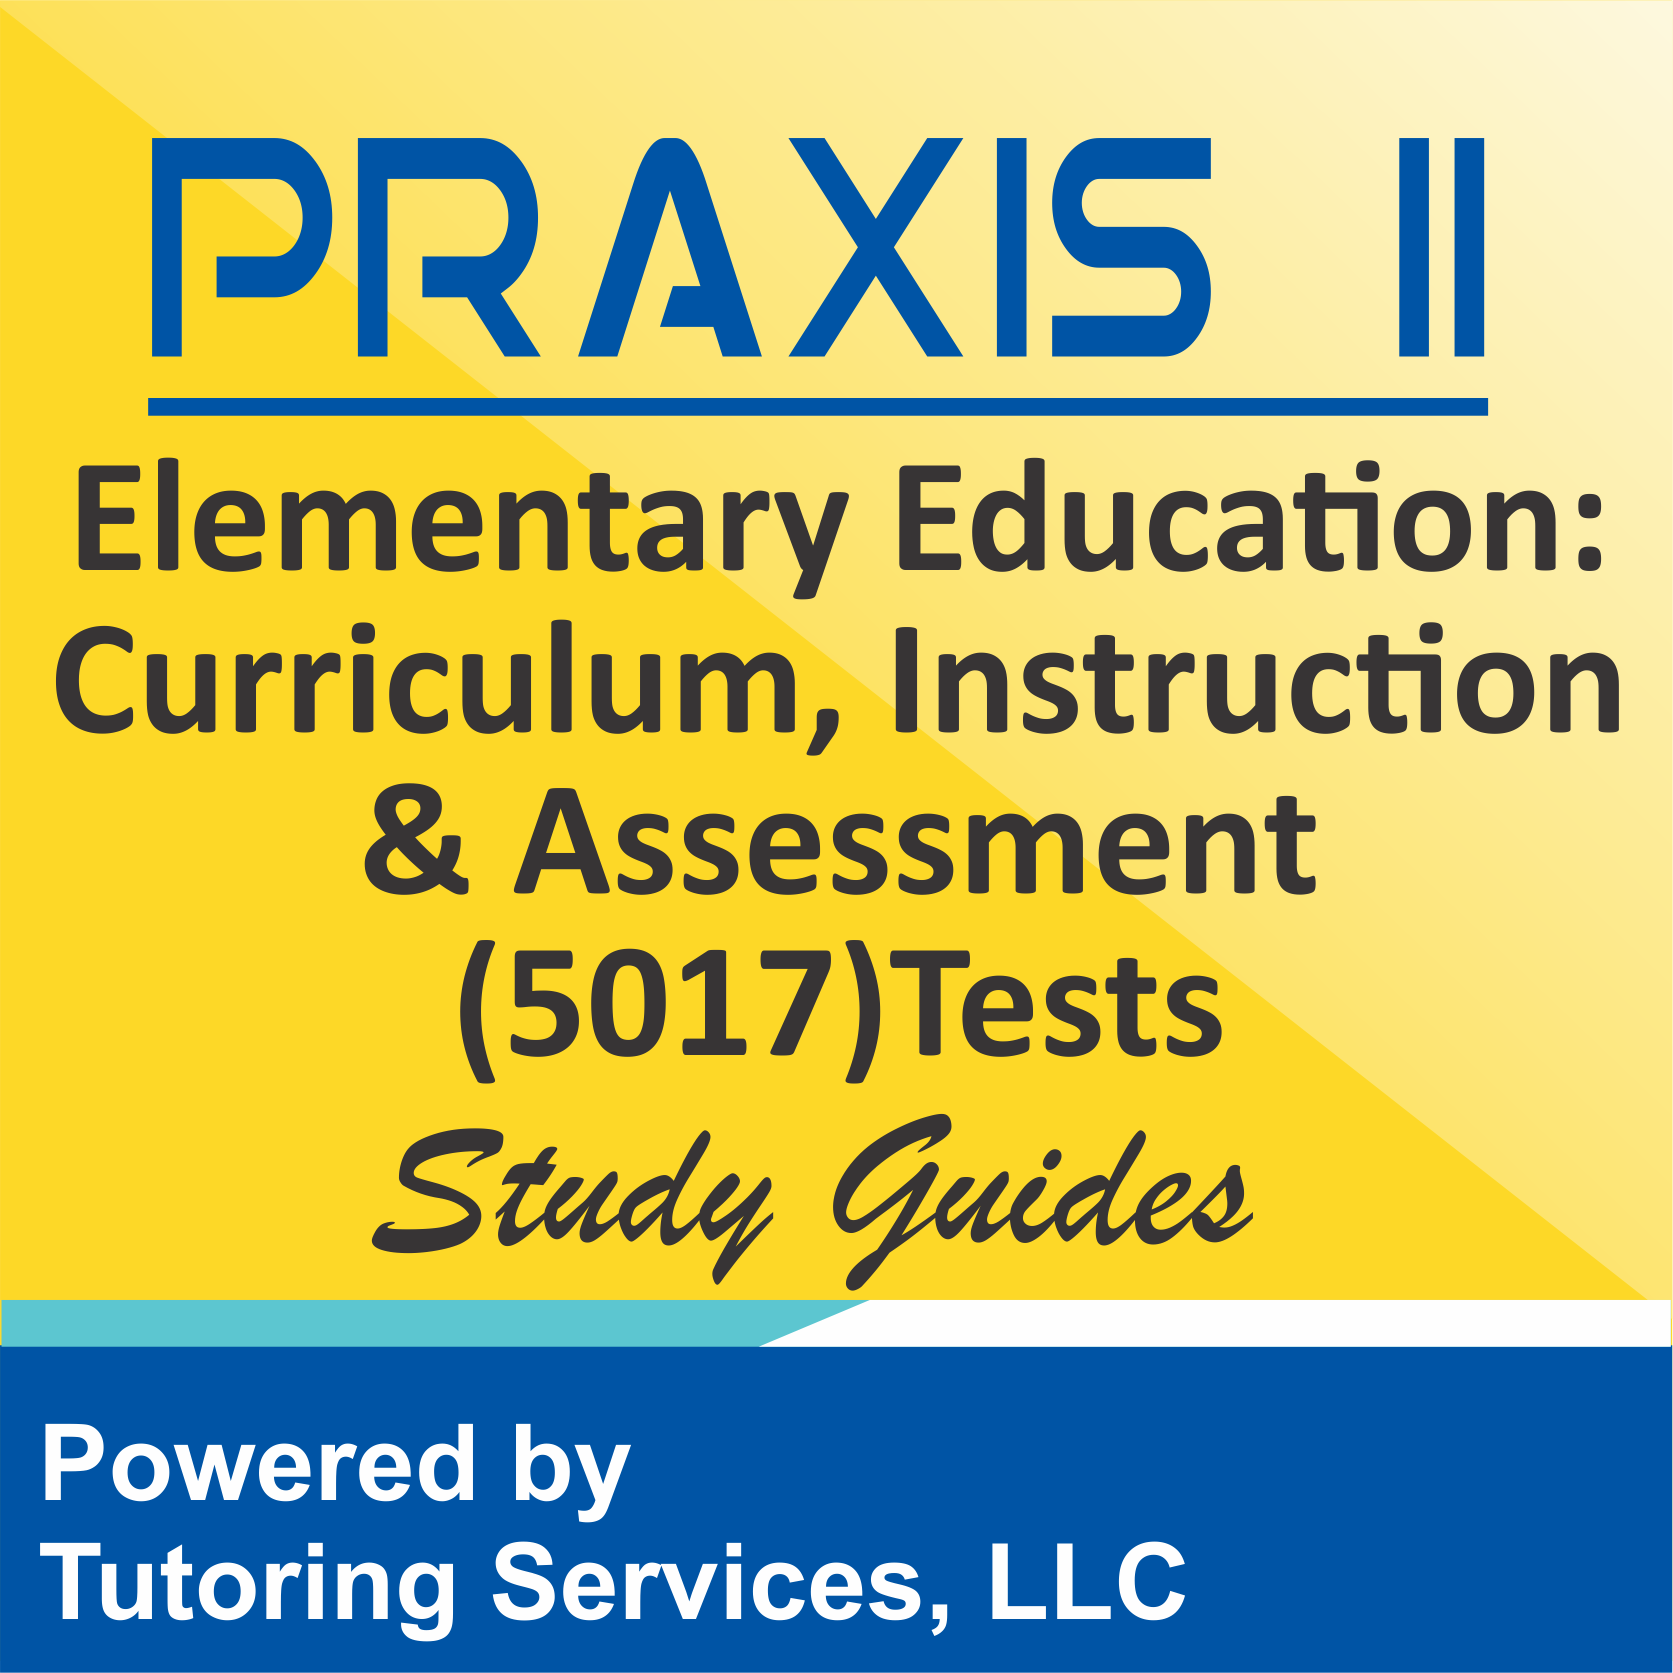 Praxis II Elementary Education: Curriculum, Instruction, and Assessment (5017) Test Information